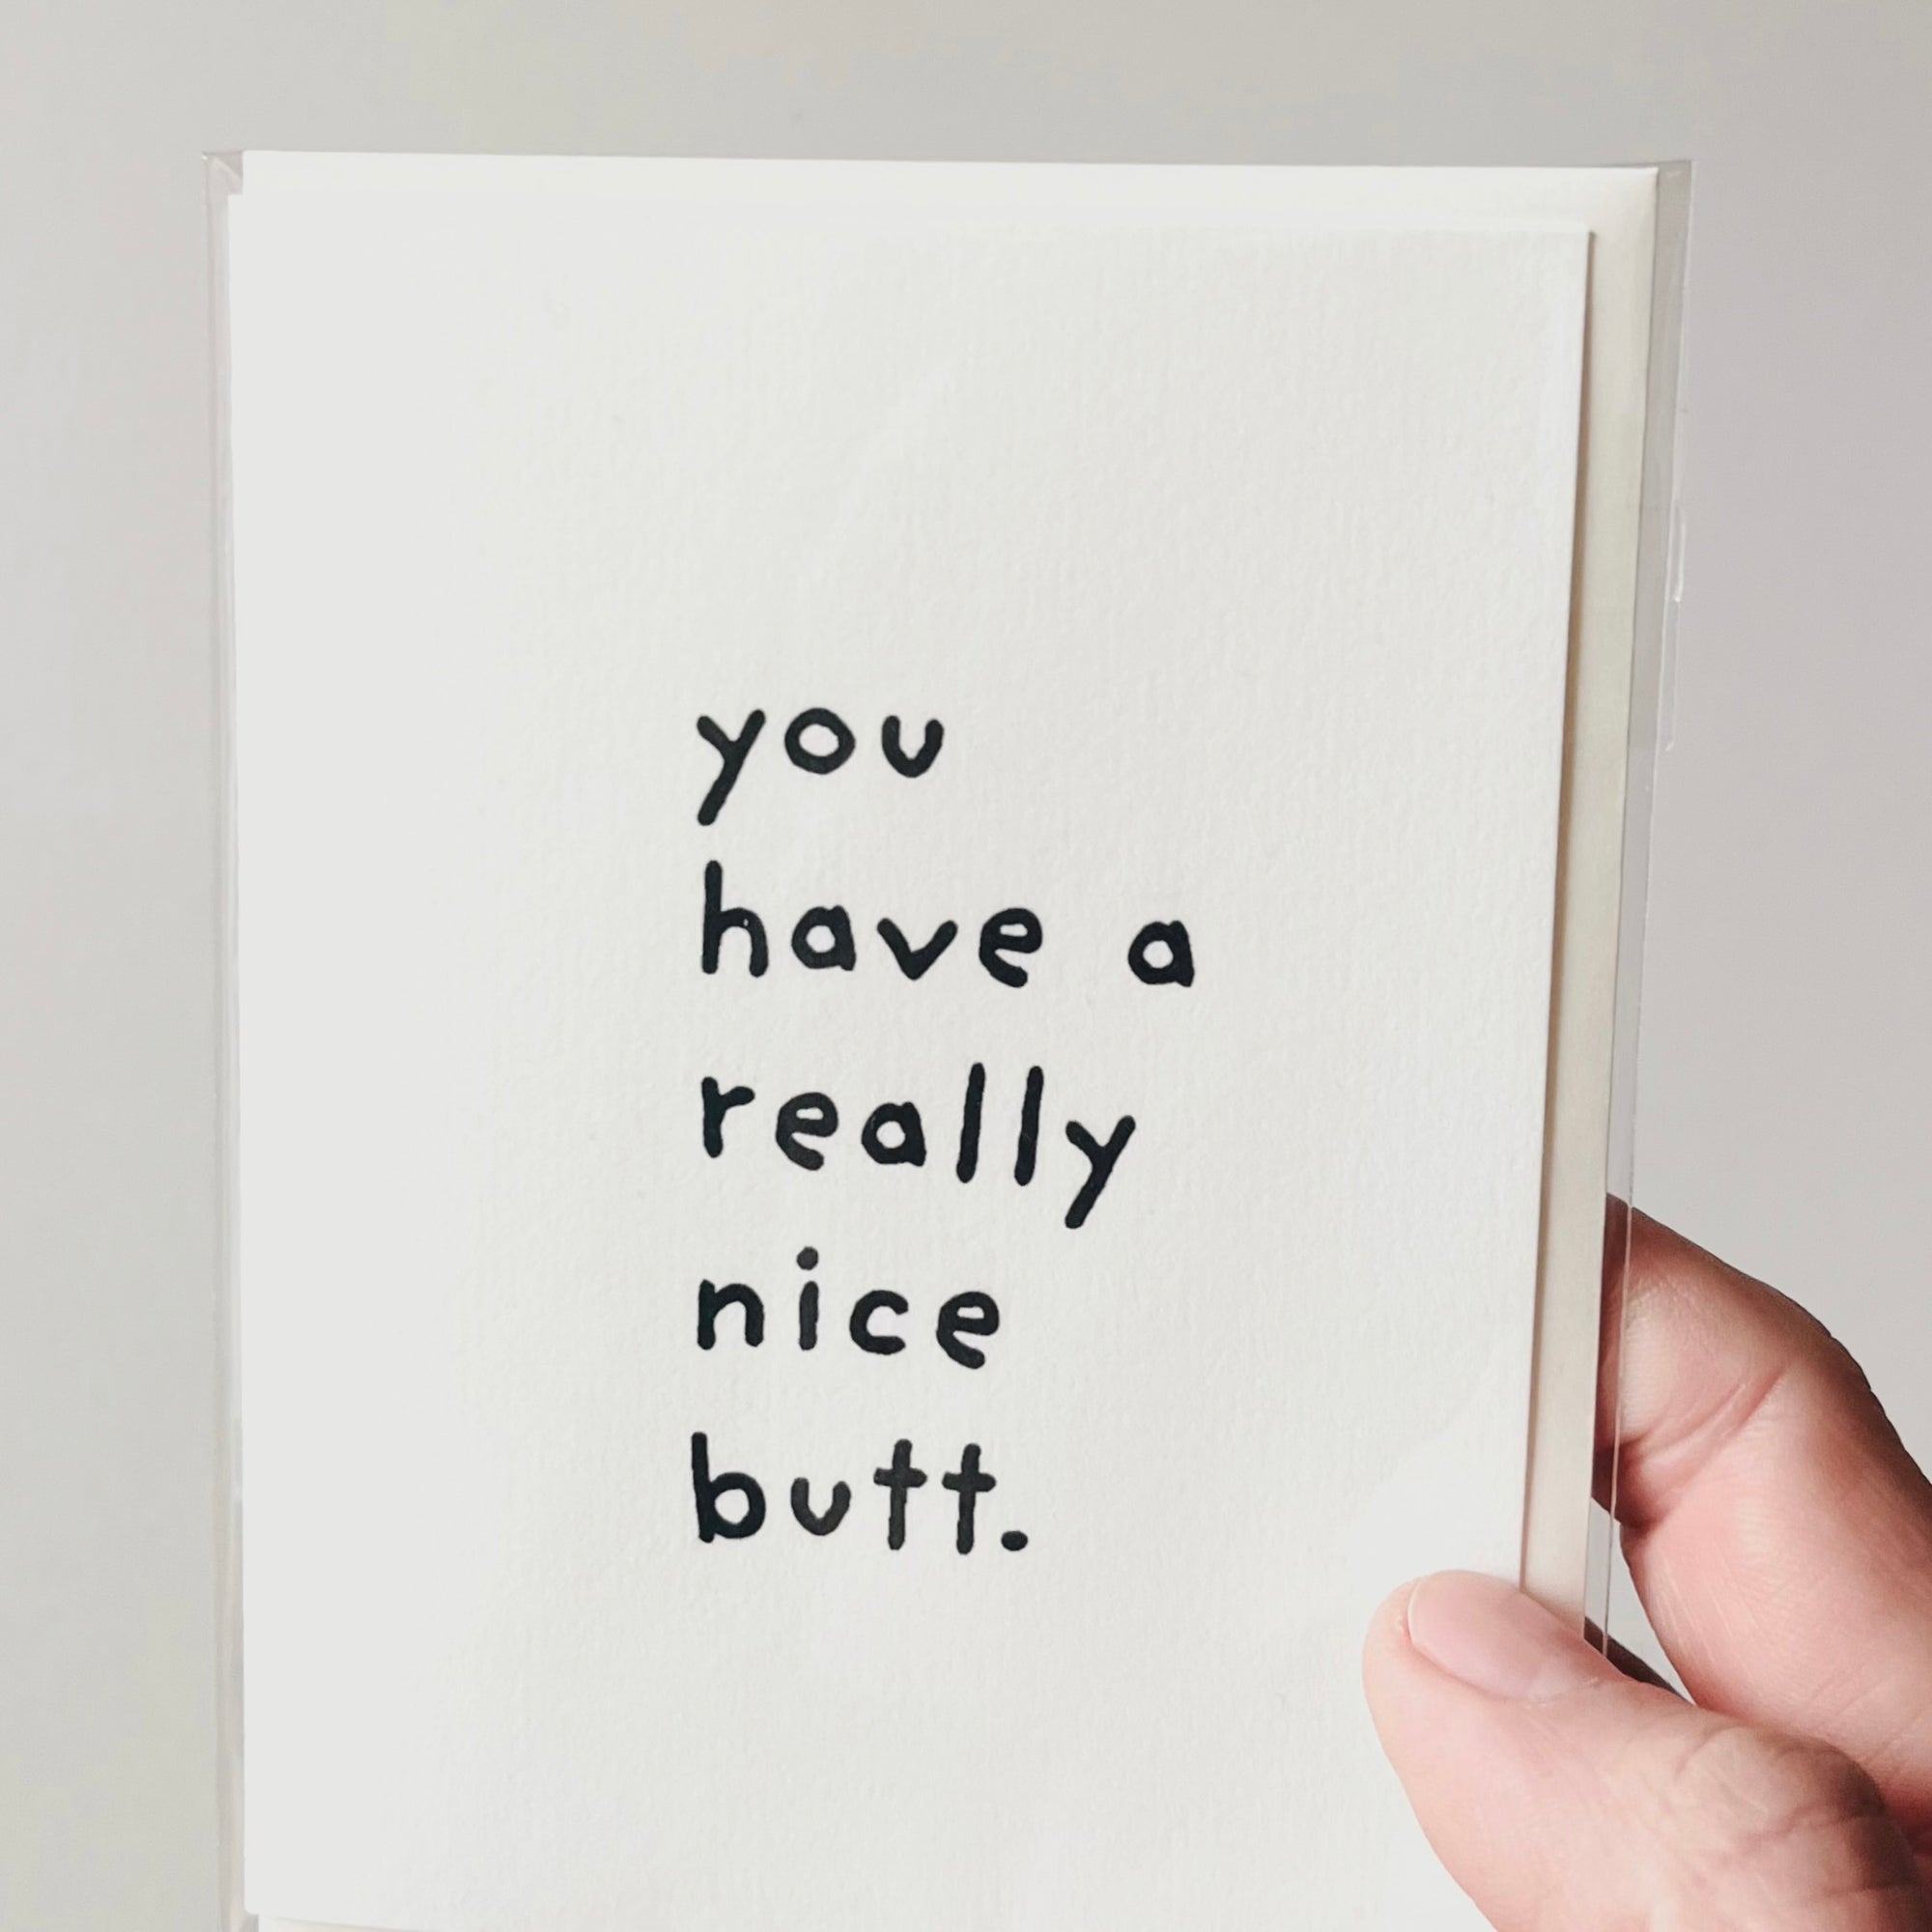 You have a really nice butt.